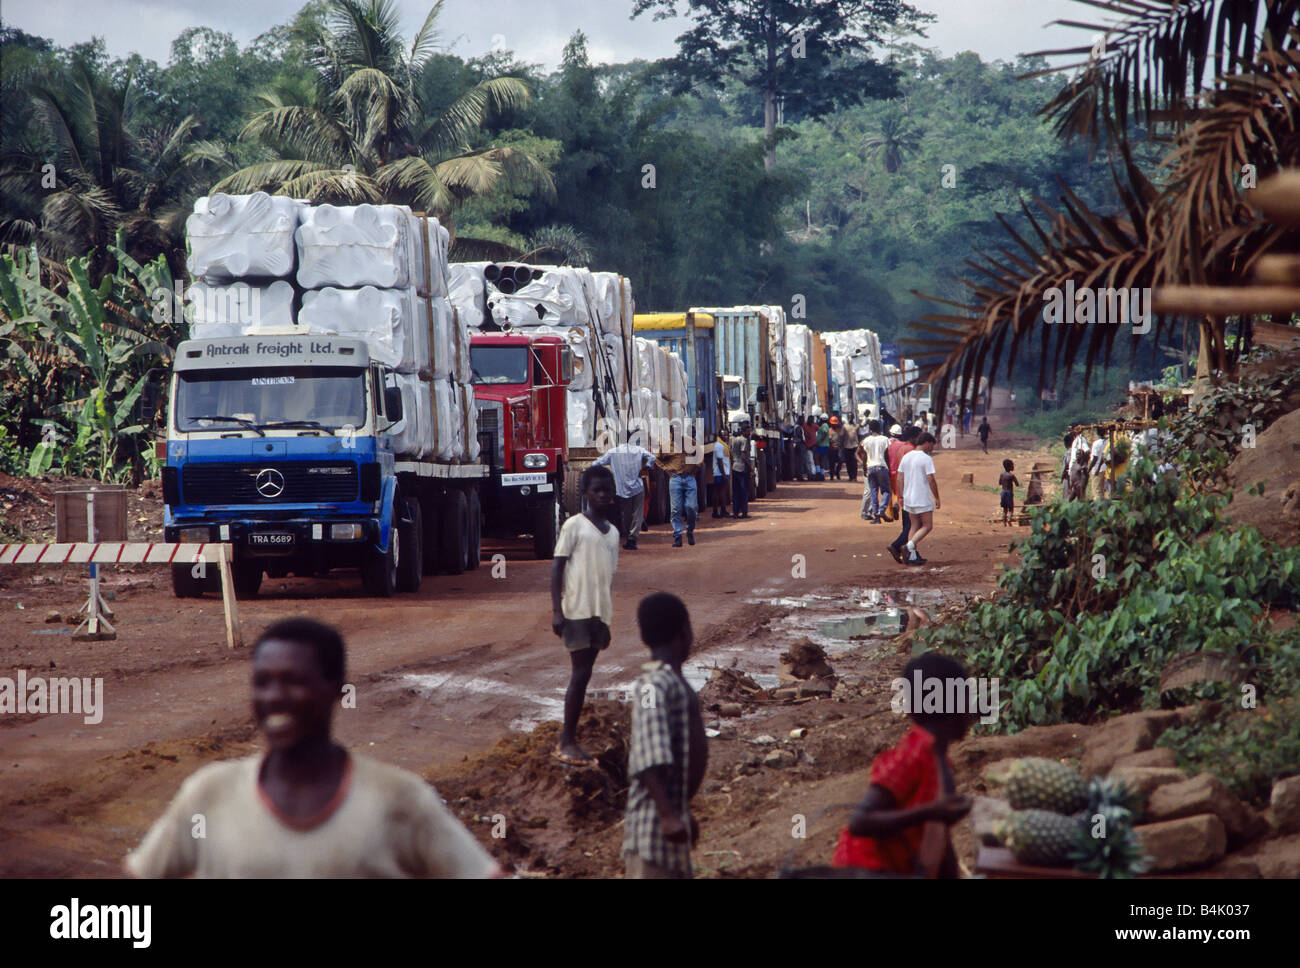 Truck Convoy with Mining Equipment on its way to the Construction Site at a Truck-Stop in the Rain Forest of Ghana, West Africa. Stock Photo